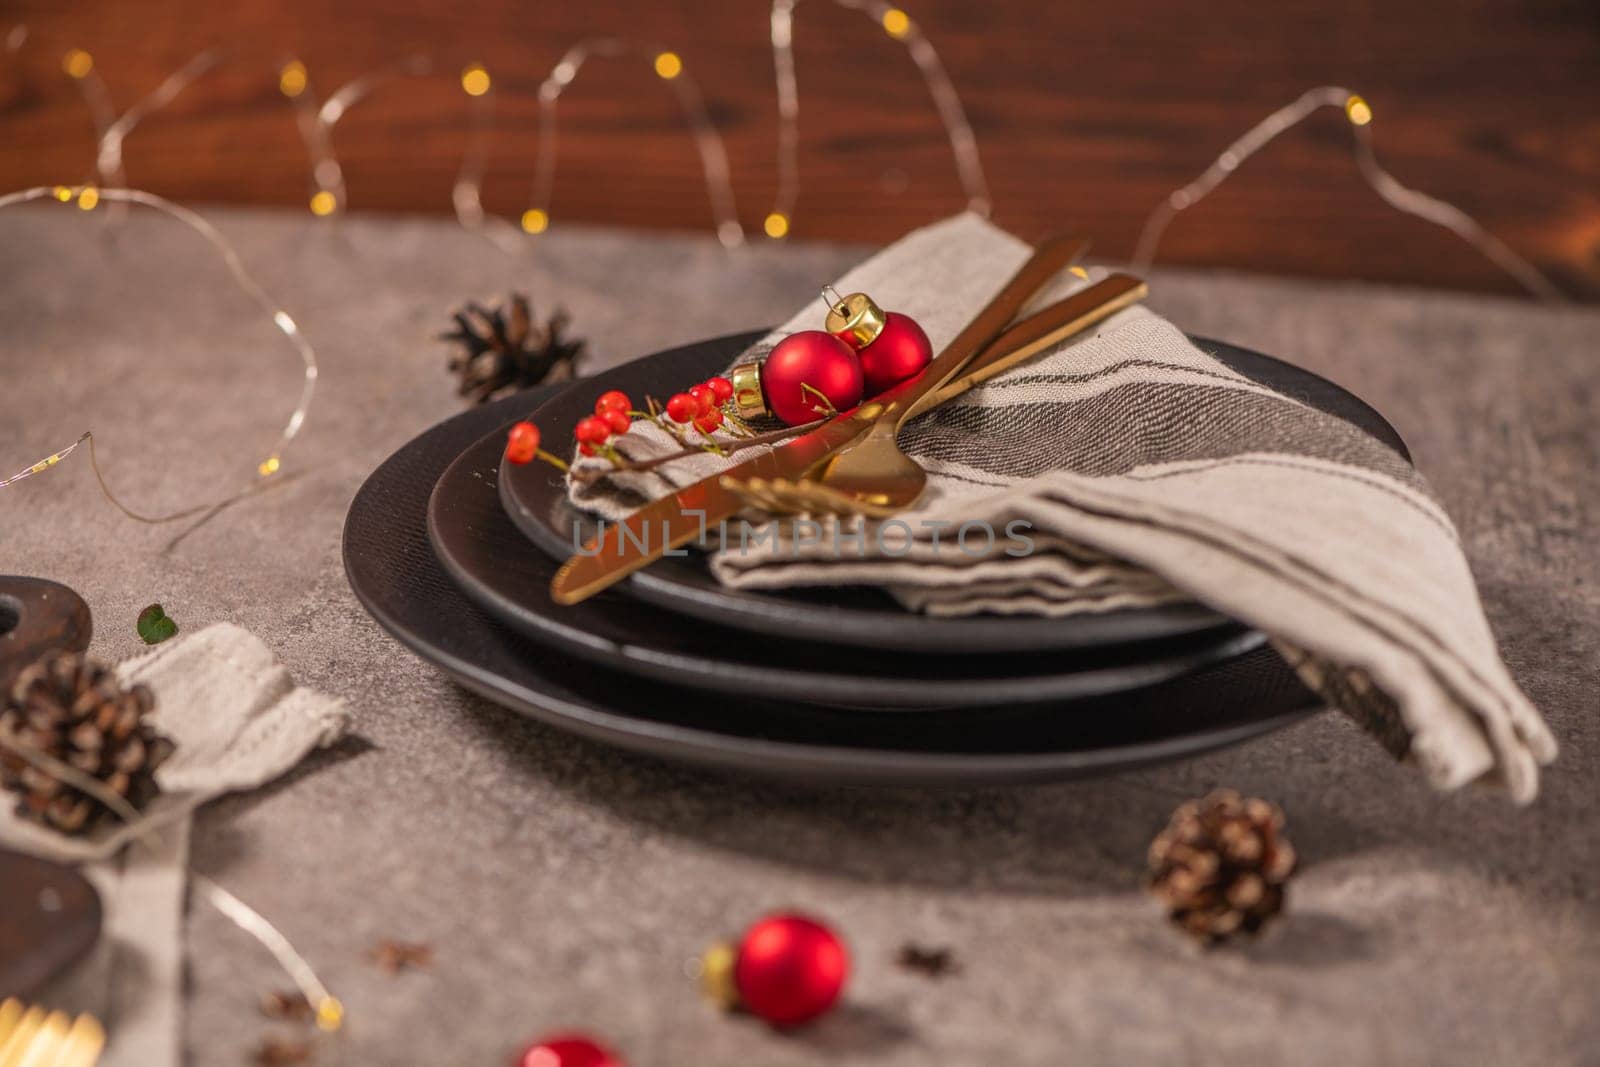 Christmas table with black plates, golden cutlery and holiday decorations.